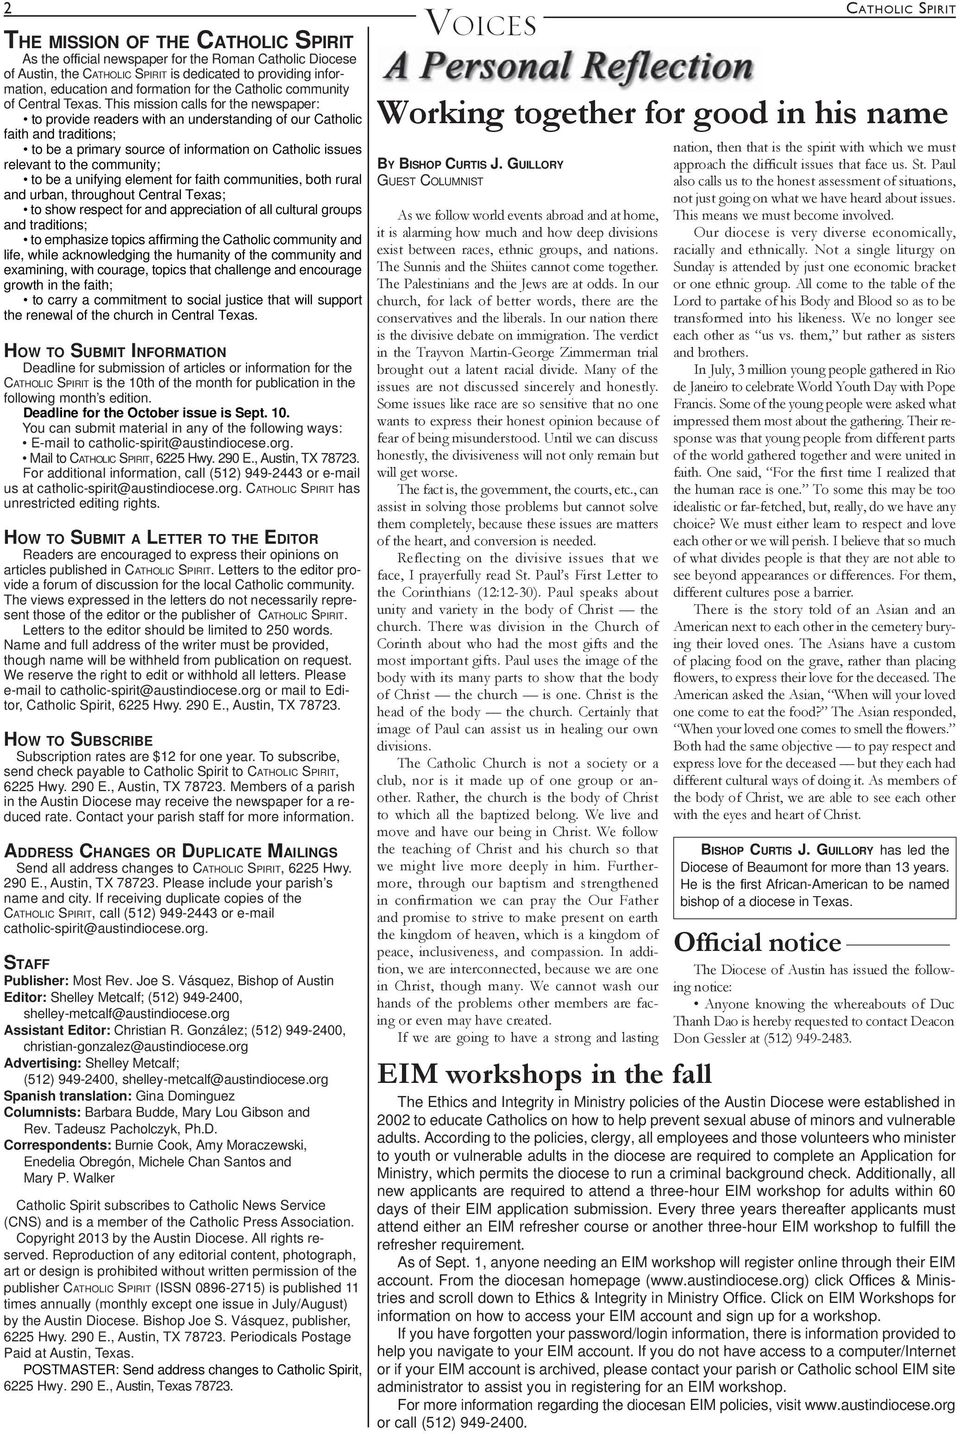 This mission calls for the newspaper: to provide readers with an understanding of our Catholic faith and traditions; to be a primary source of information on Catholic issues relevant to the